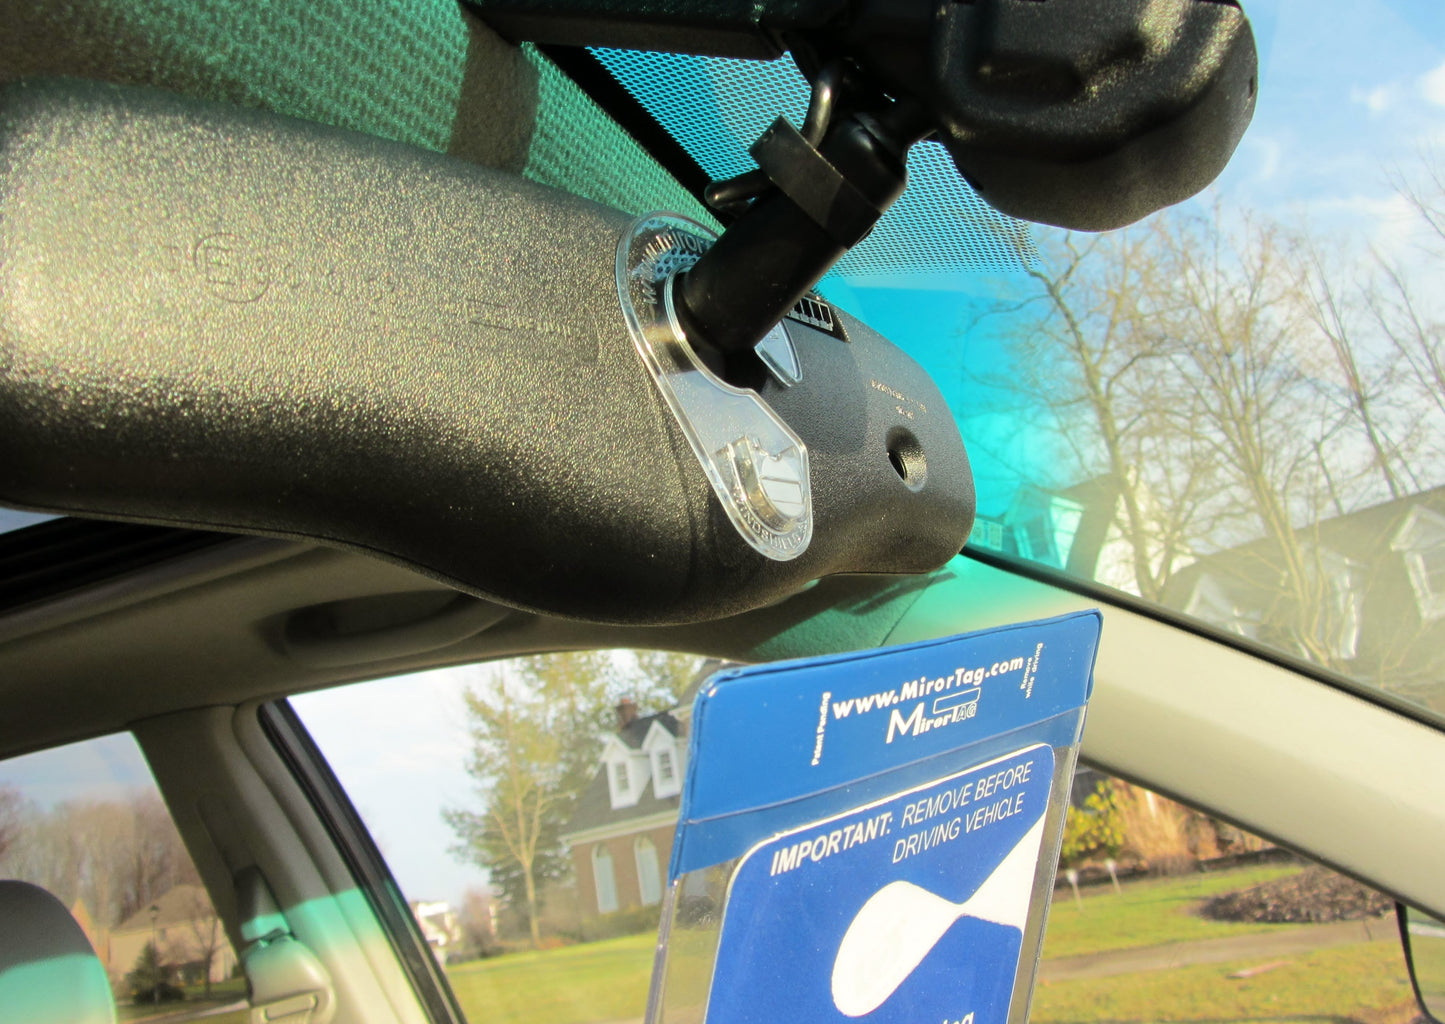 conveniently attach and detach your hanicap parking placard with ease